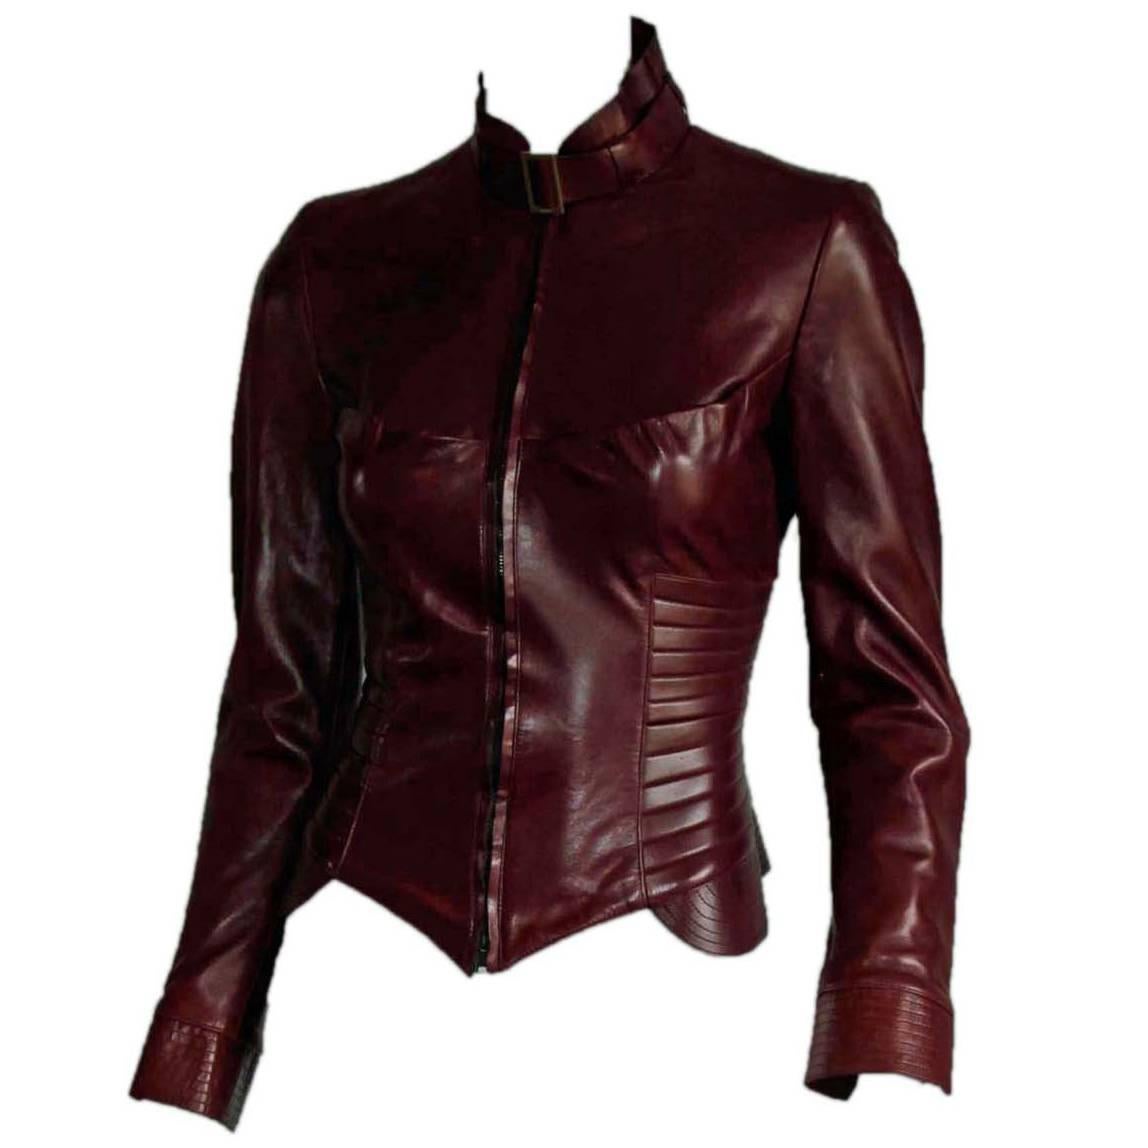  The Dreamiest Tom Ford Gucci FW 2003 Maroon Red Leather Corseted Moto Jacket!